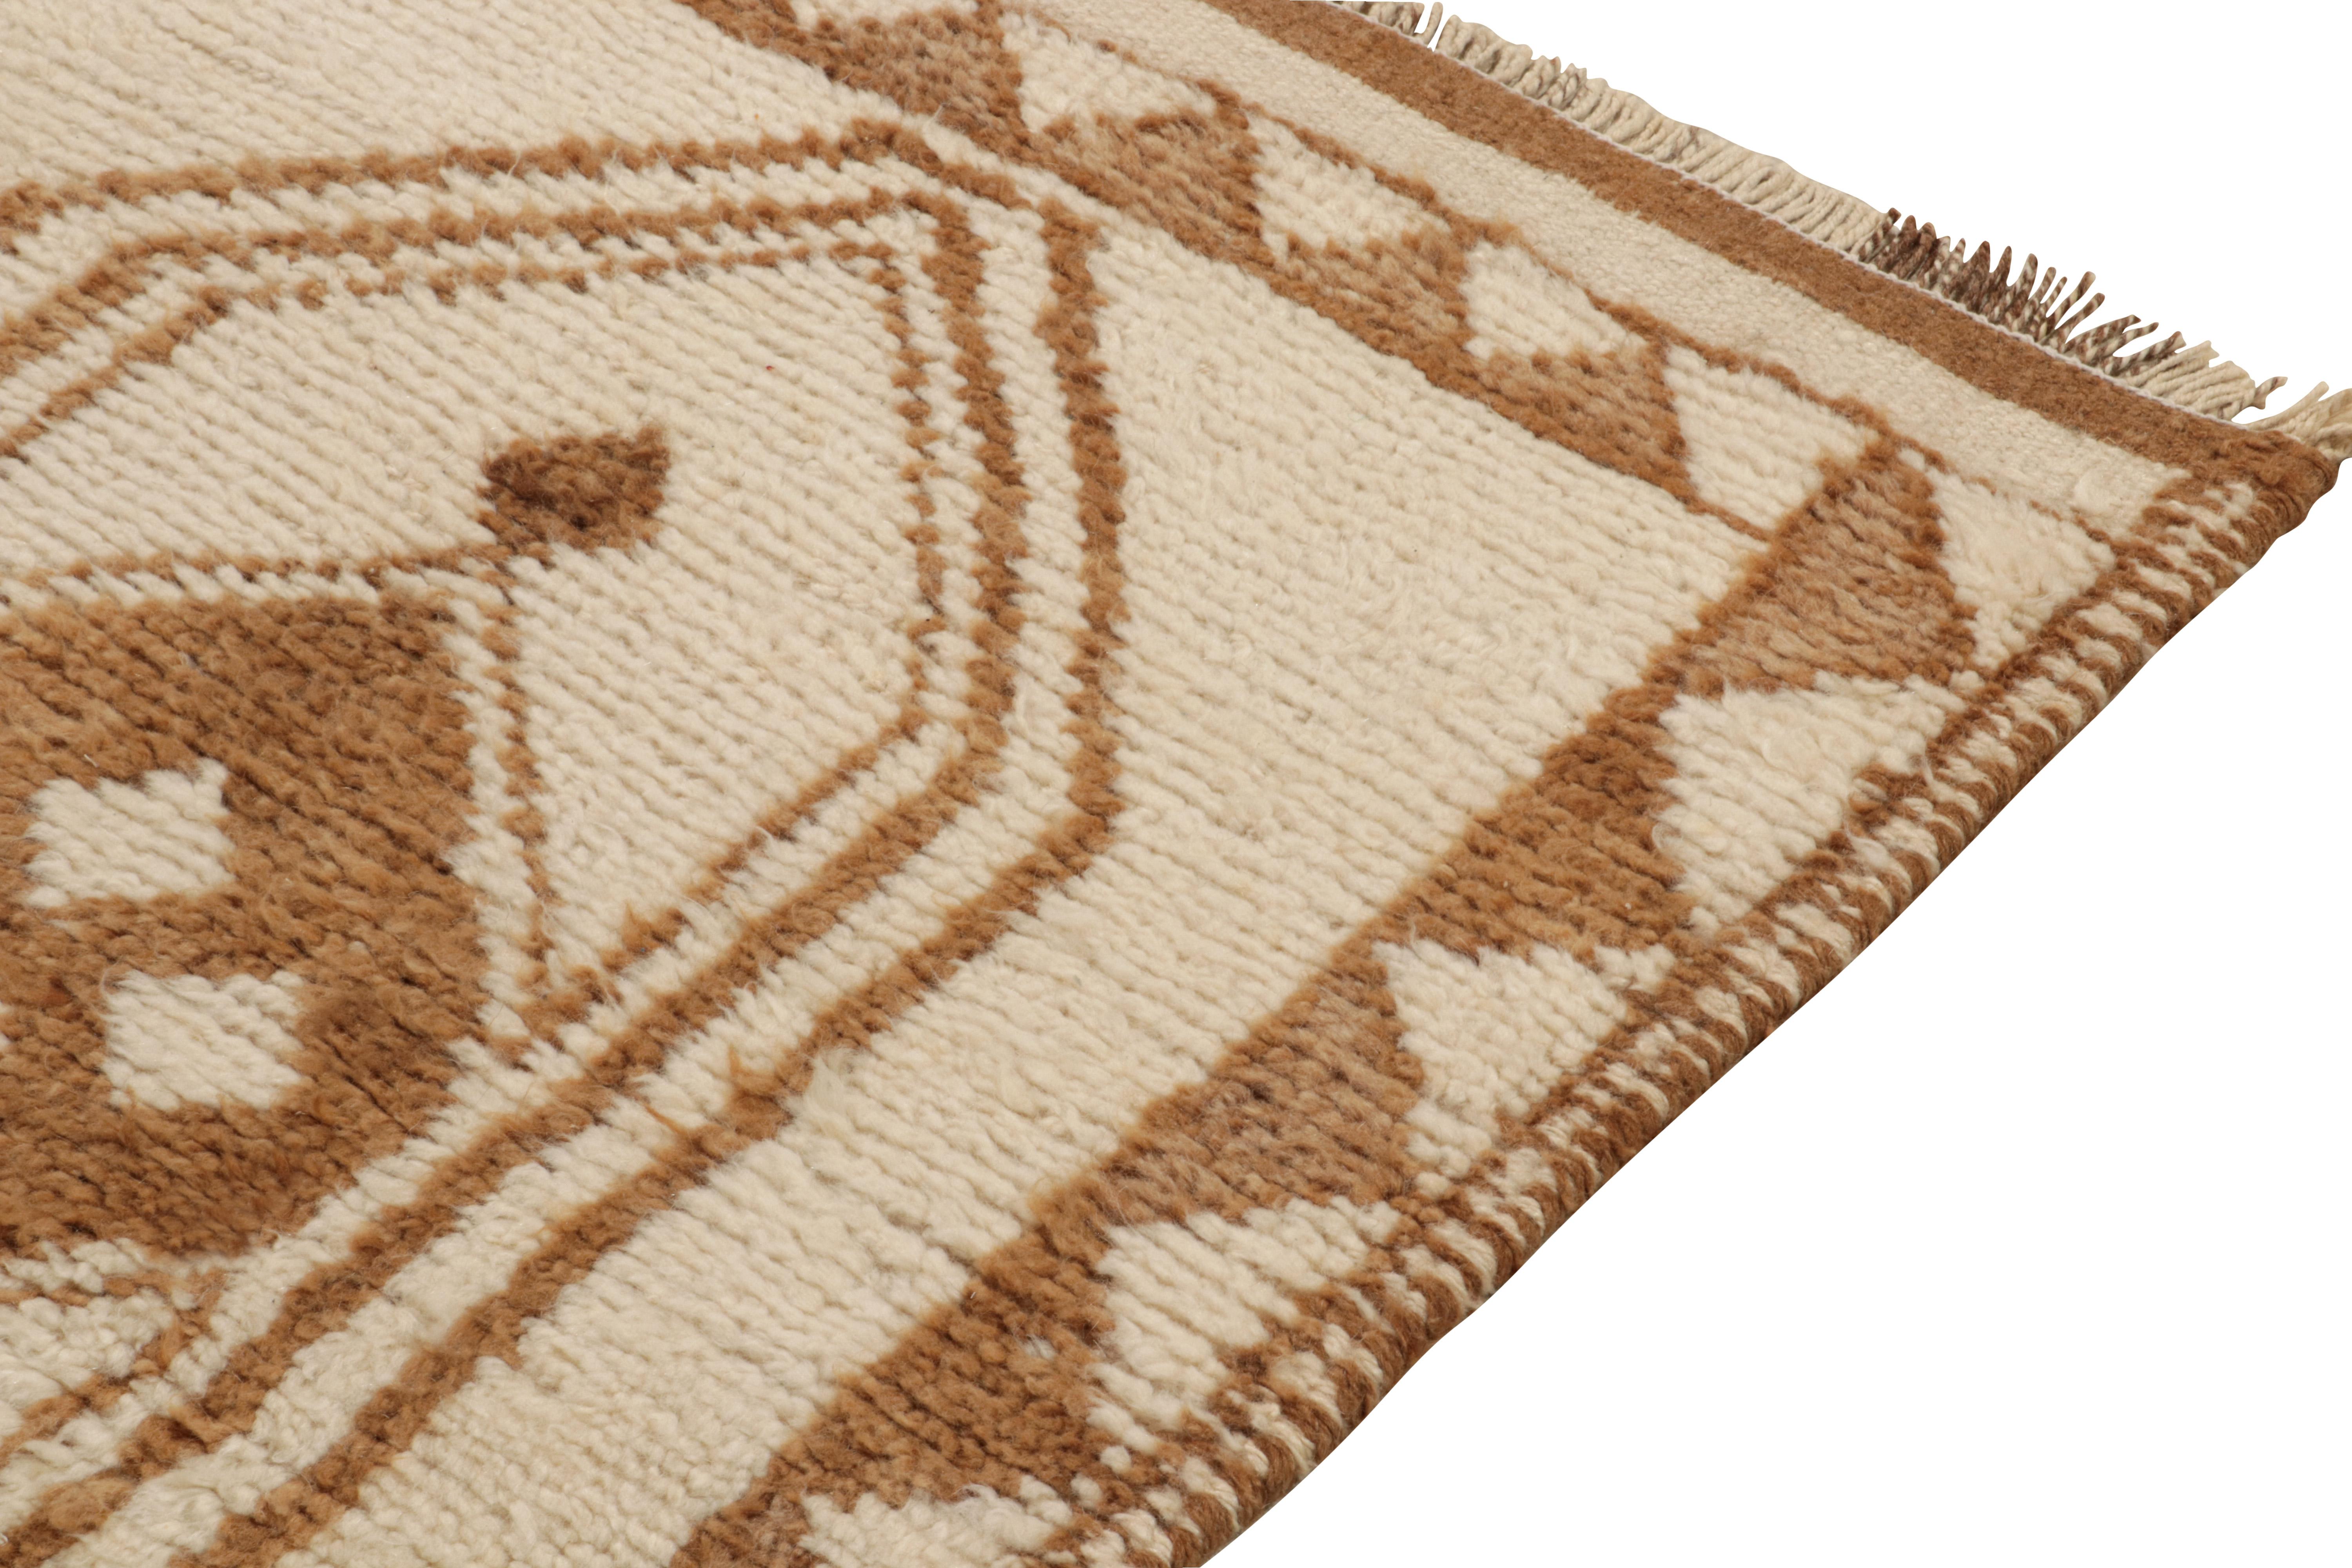 Vintage Tribal Runner in Off-White Beige-Brown Medallion Patterns by Rug & Kilim In Good Condition For Sale In Long Island City, NY